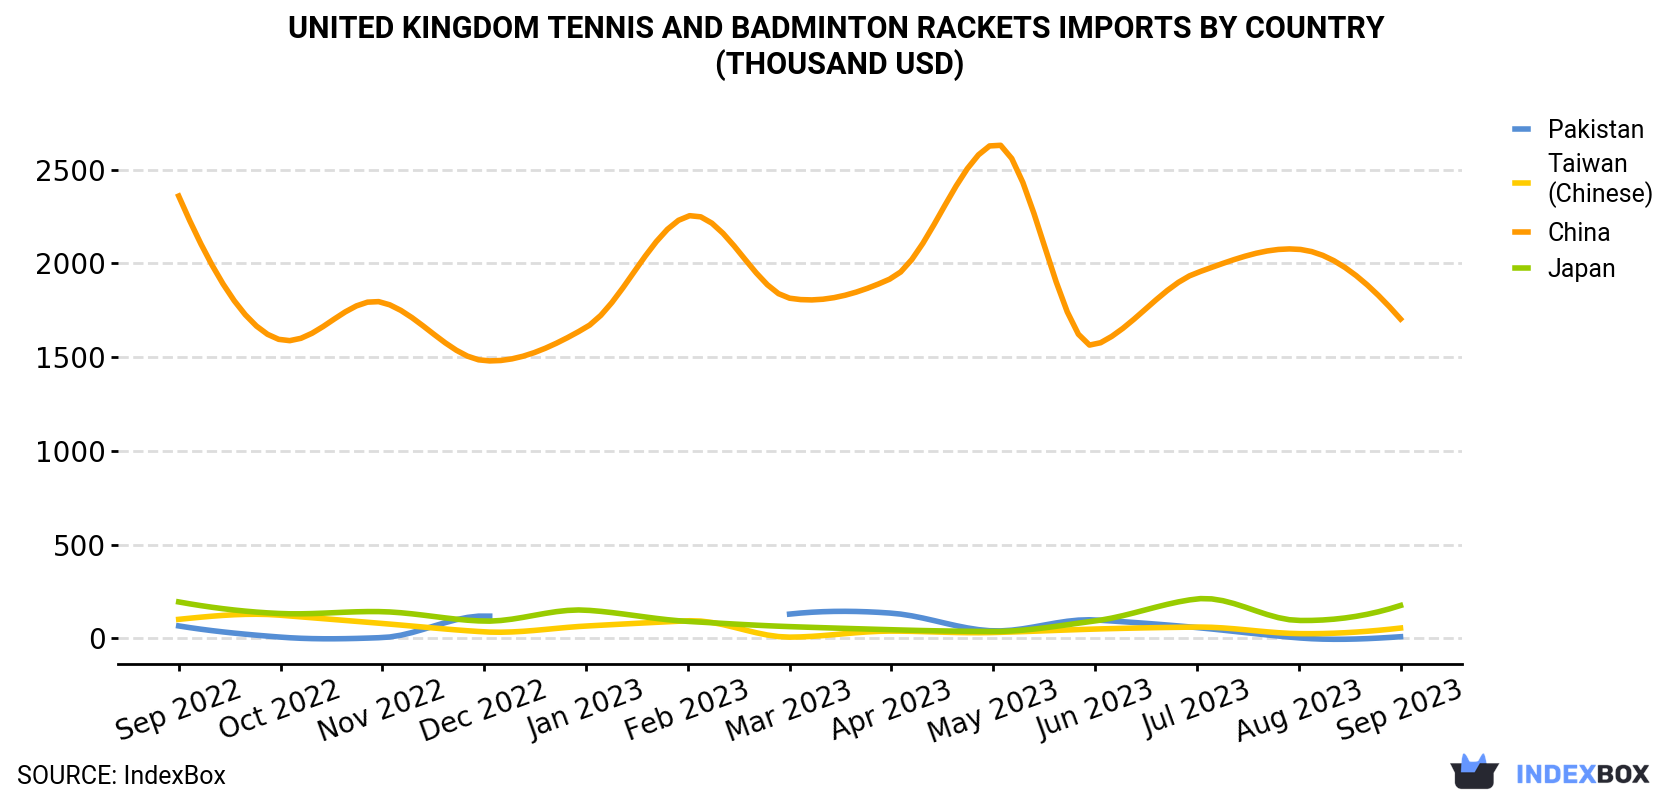 United Kingdom Tennis And Badminton Rackets Imports By Country (Thousand USD)